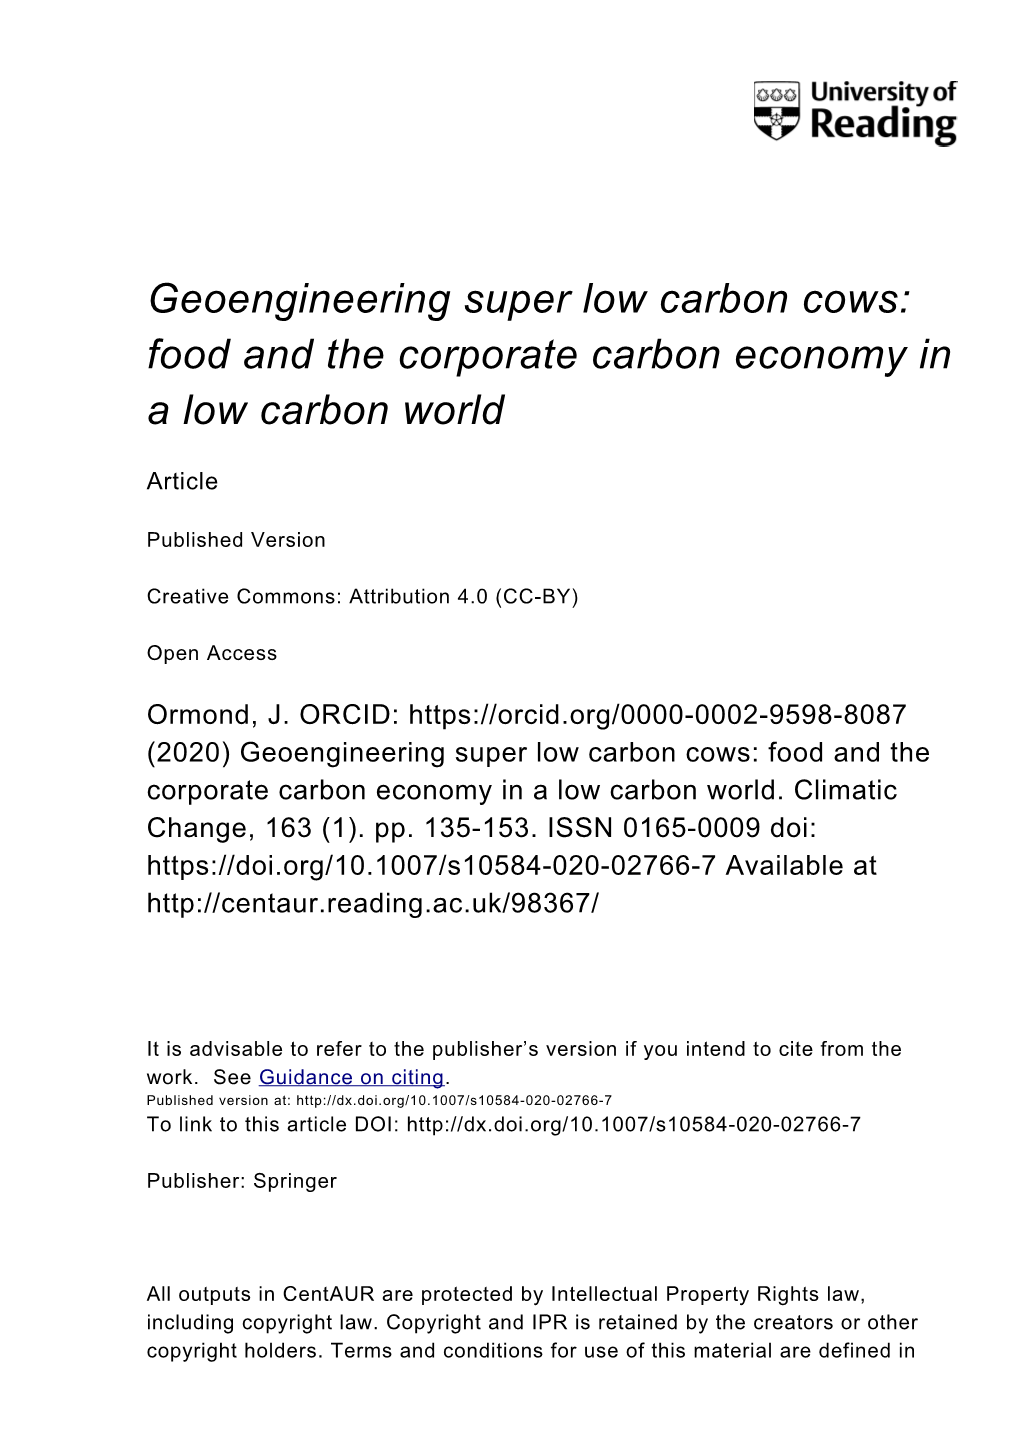 Geoengineering Super Low Carbon Cows: Food and the Corporate Carbon Economy in a Low Carbon World